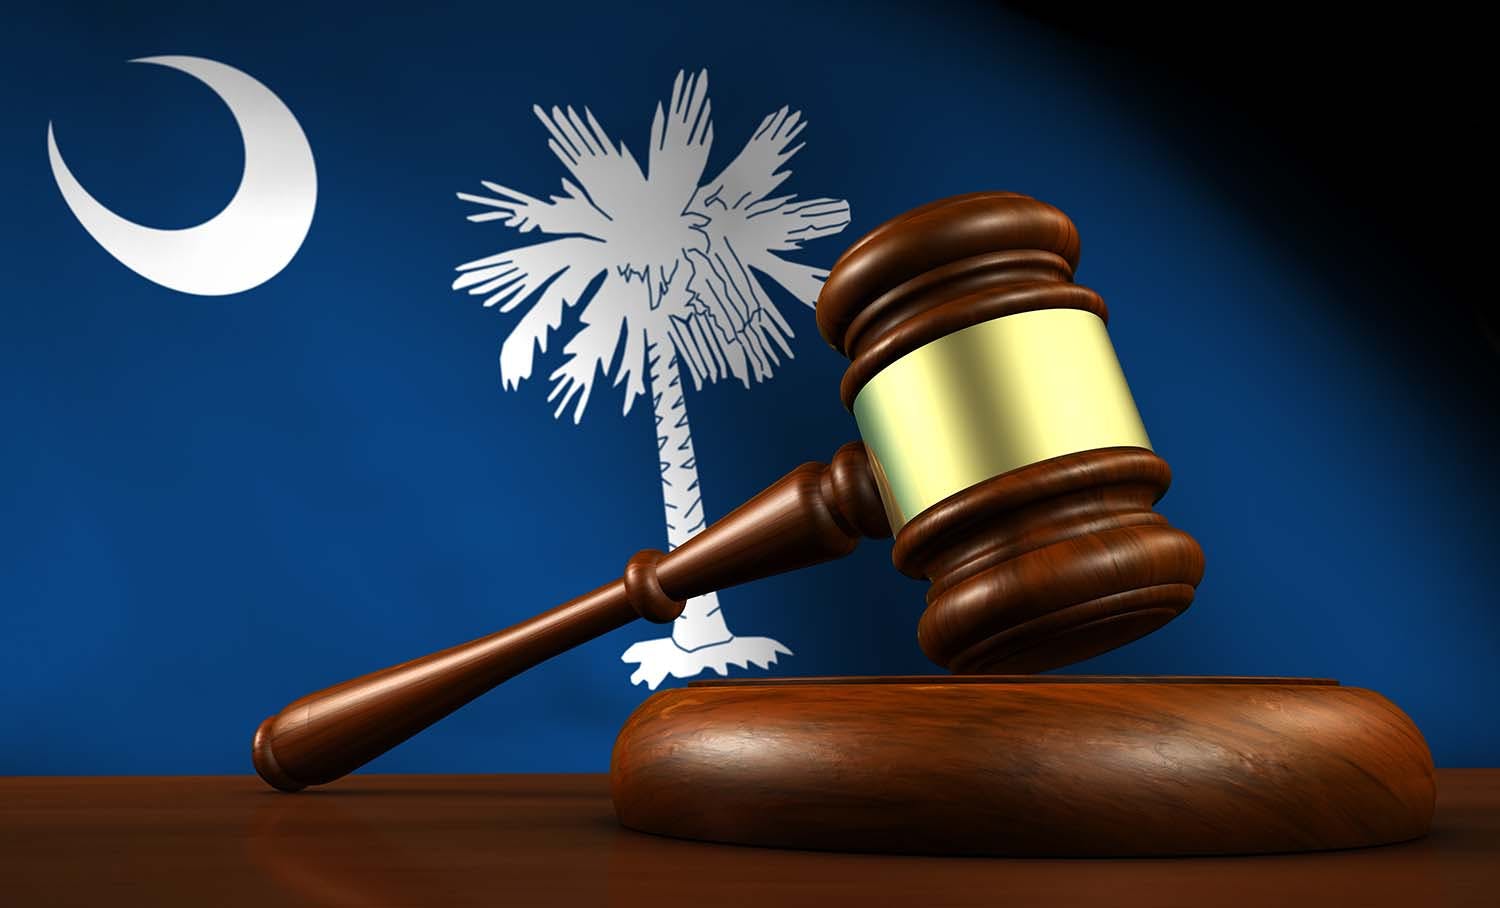 South Carolina flag with legal gavel in front